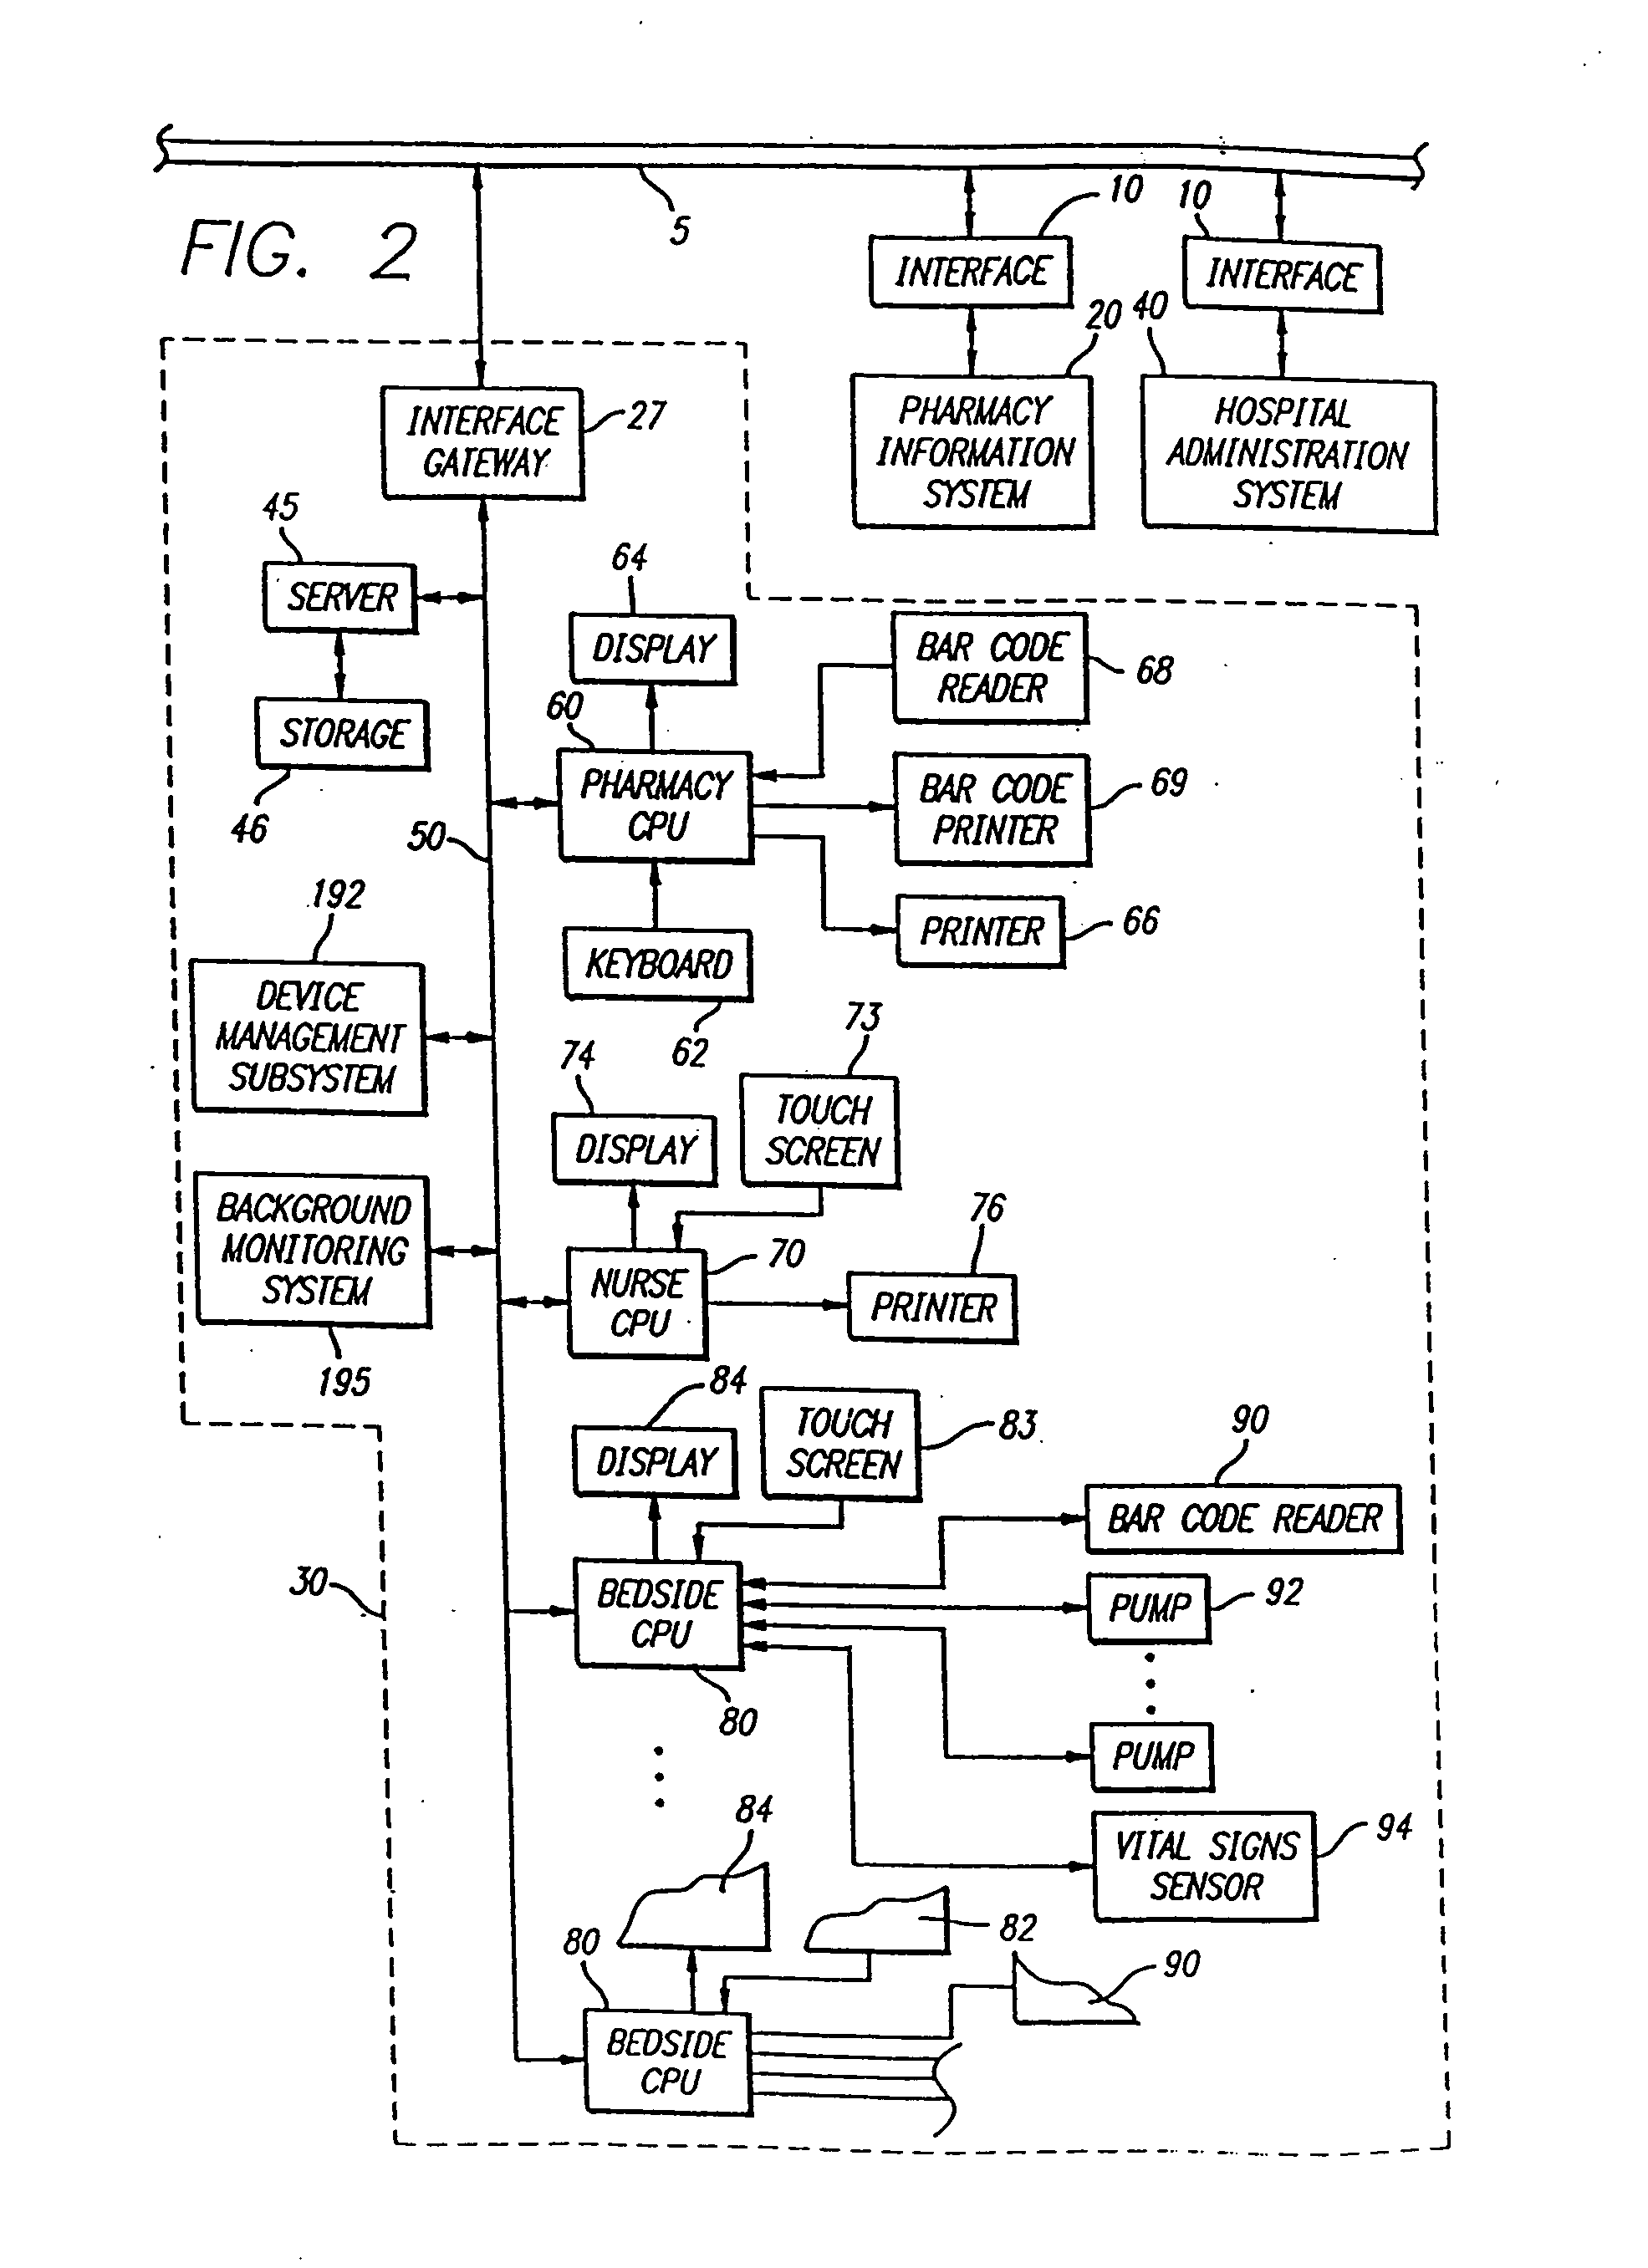 System and method for controlling the delivery of medication to a patient